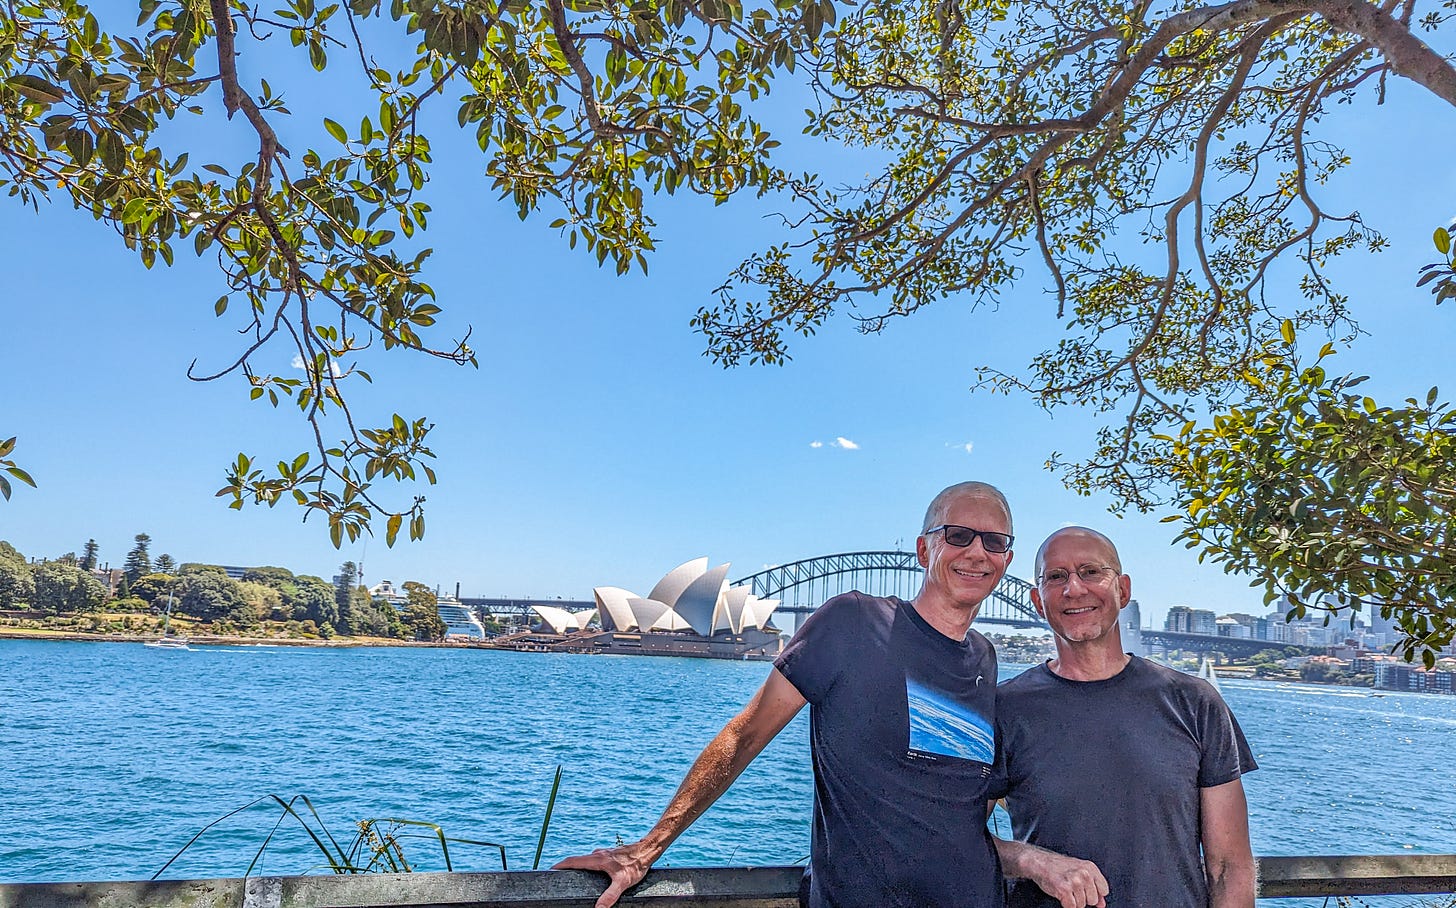 Brent and Michael with the Sydney Opera House in the distance.